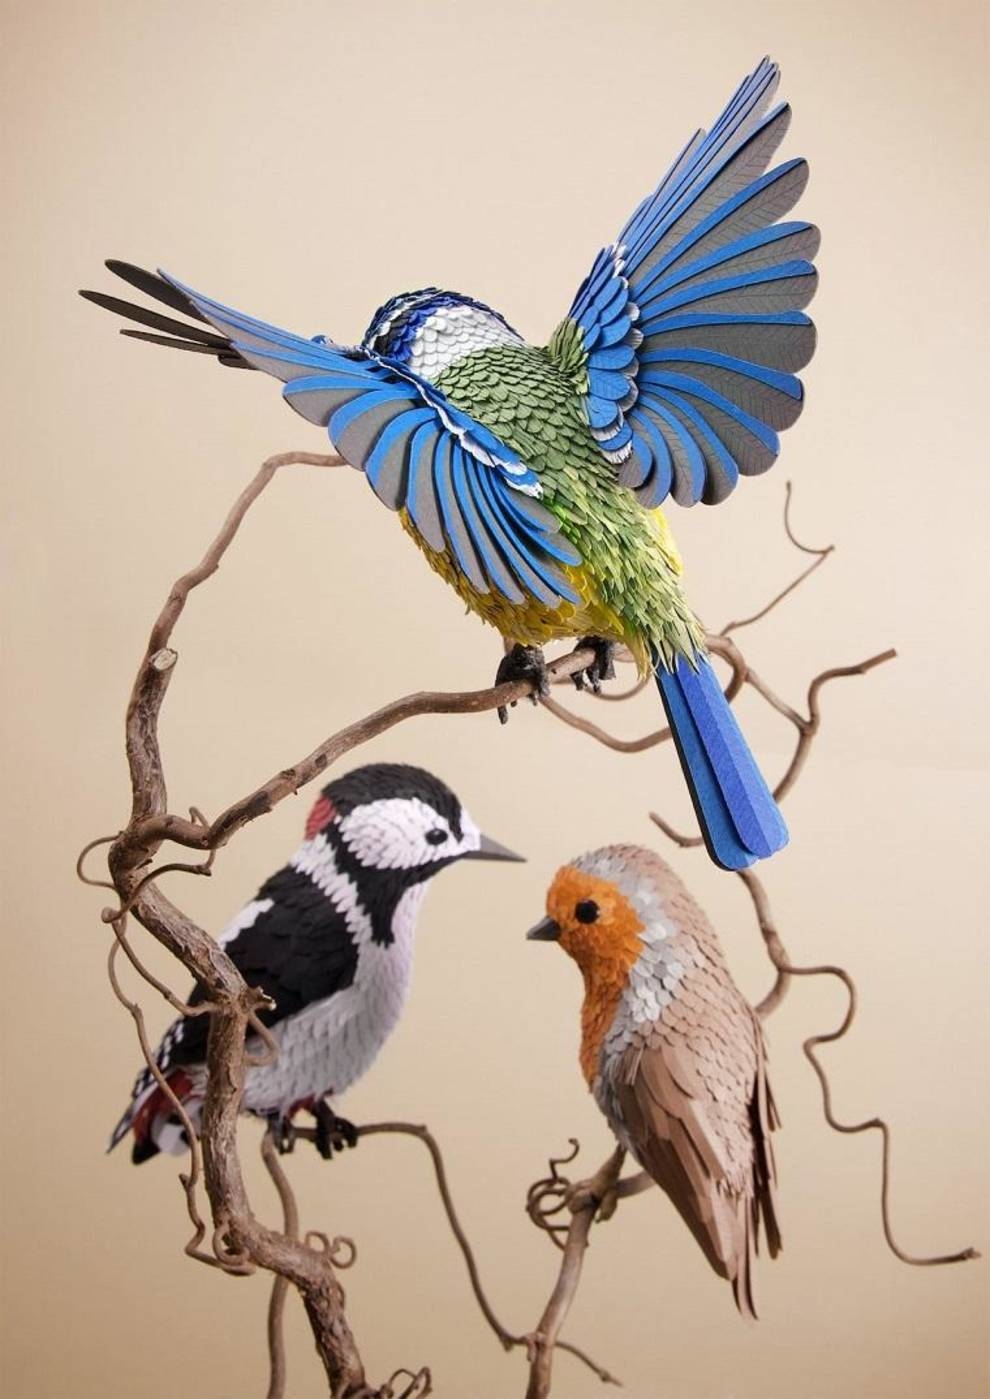 Bright plumage and natural colors — incredibly realistic birds made of paper by Lisa Lloyd (Photo)